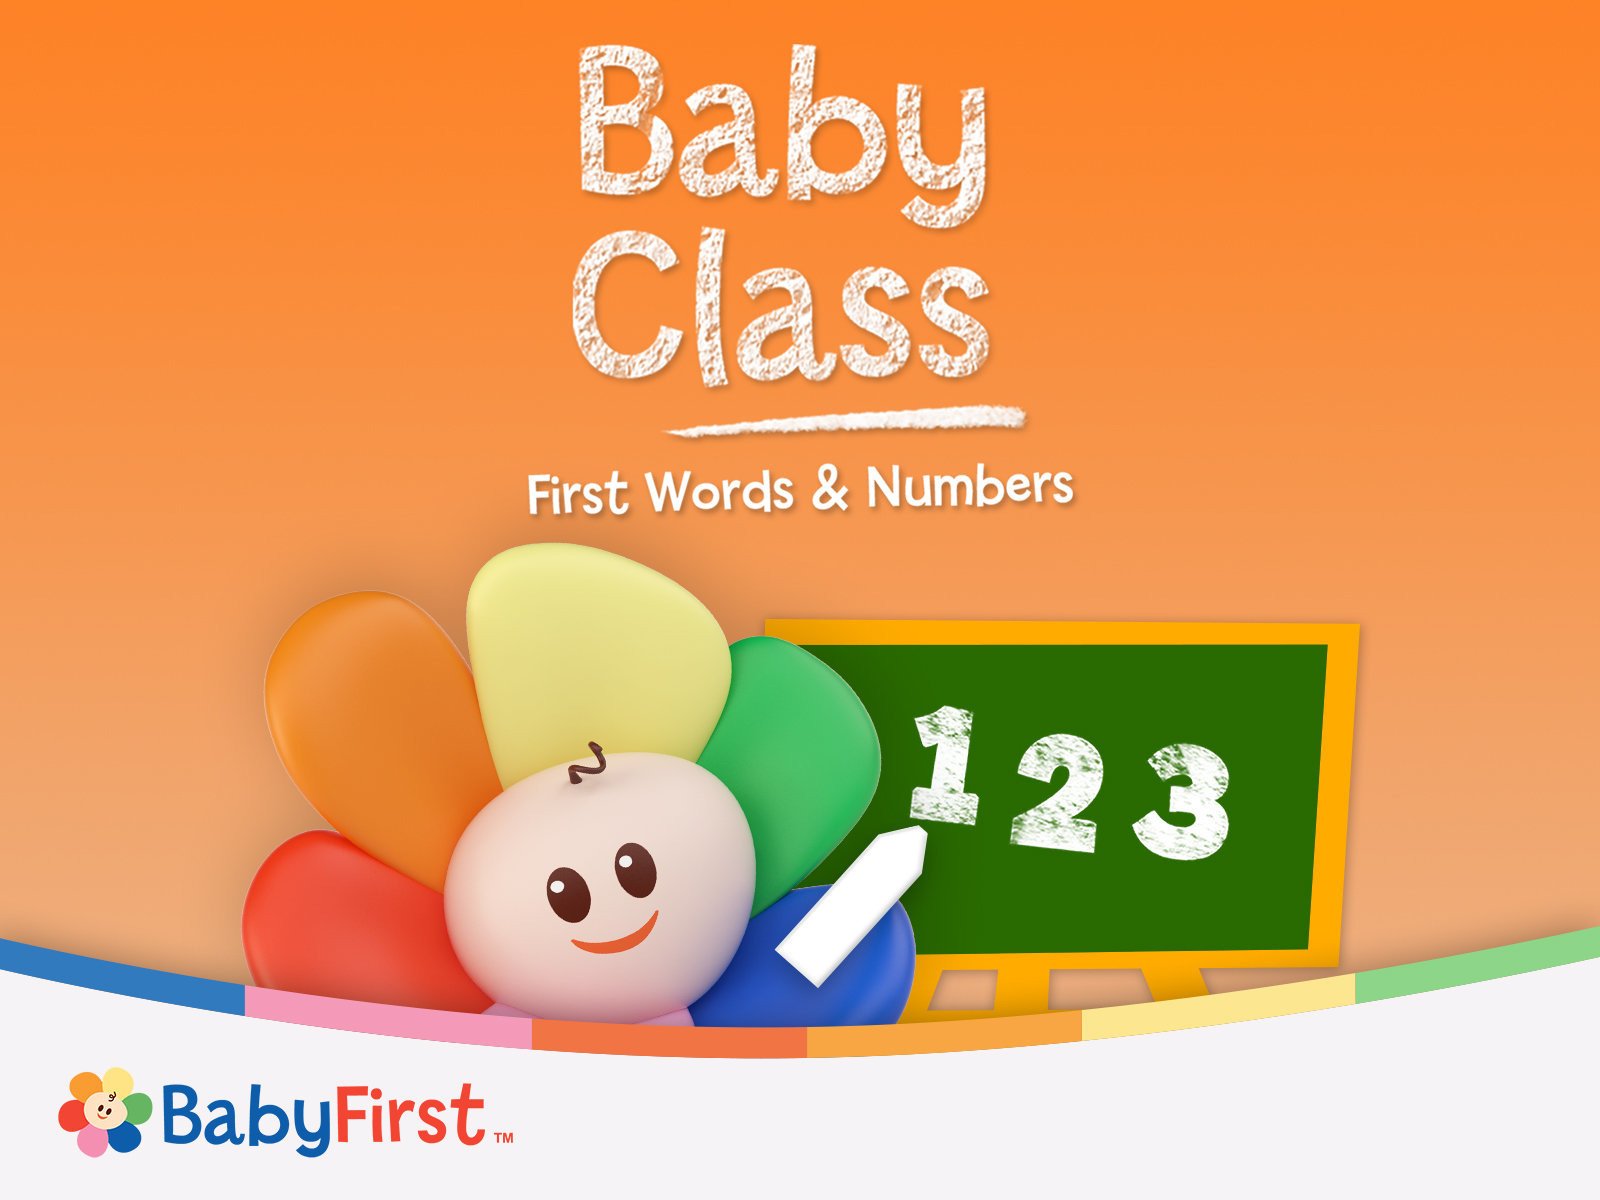 Access and Download Light Academy Nursery & Primary Baby Class Work 1